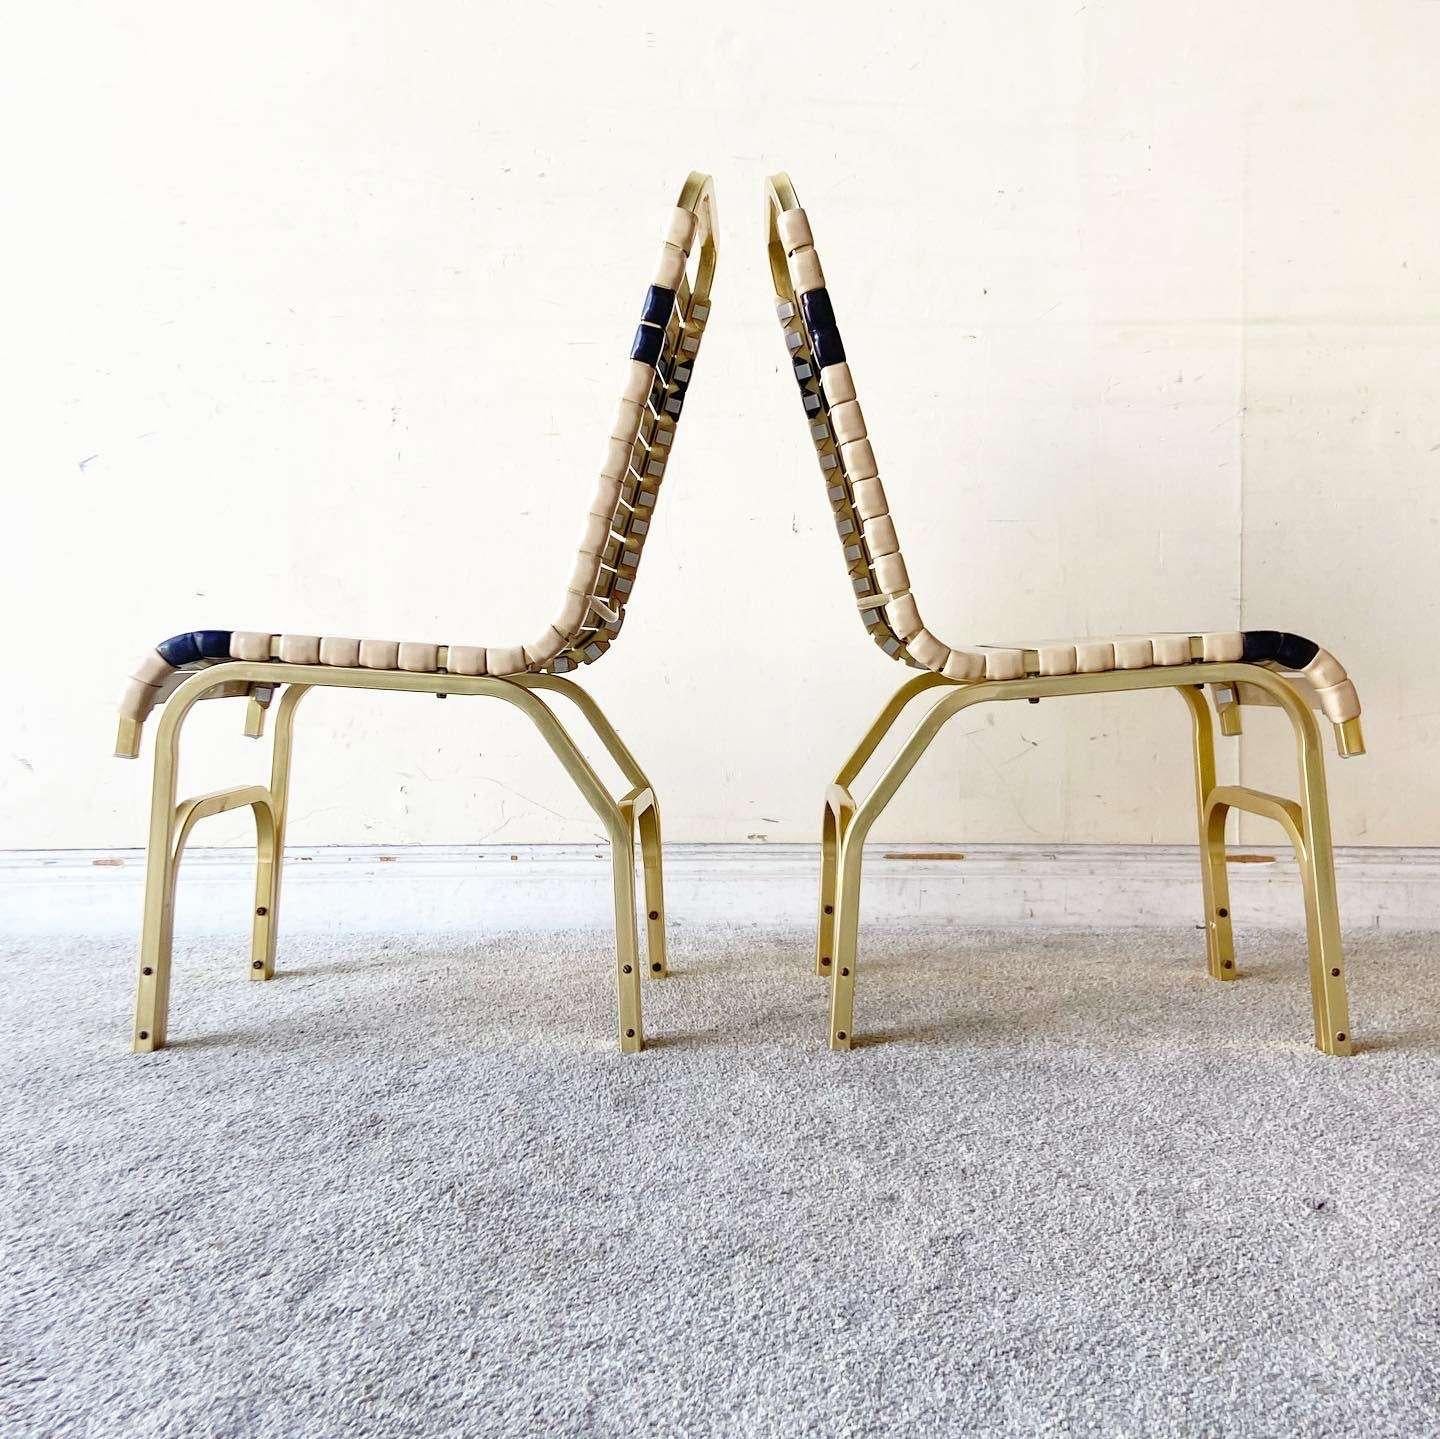 Late 20th Century Miami Gold Beige & Blue Metal Poolside Chairs and Table - 3 Pieces For Sale